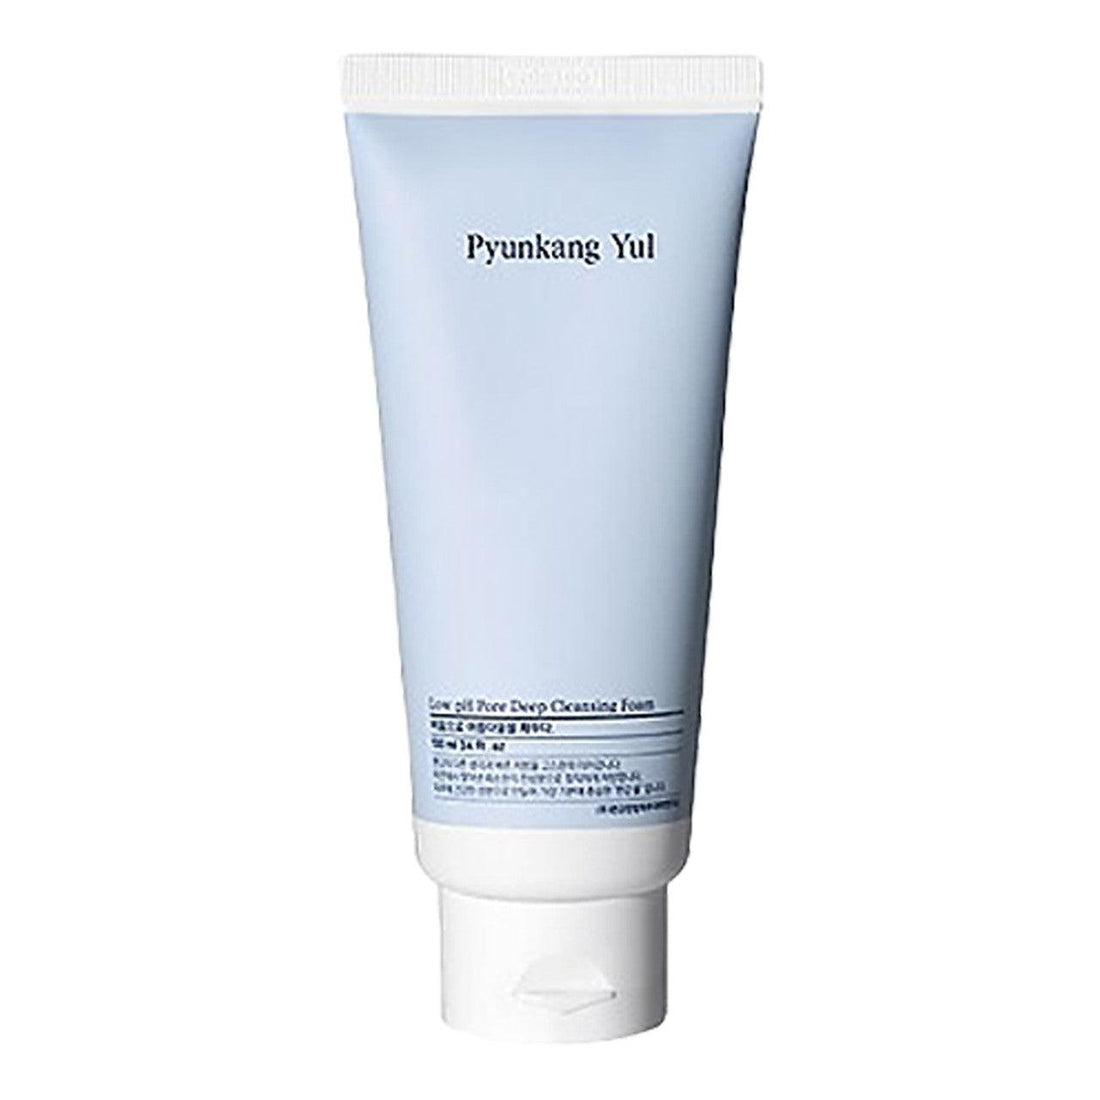 Shop Pyunkang Yul Low pH Pore Deep Cleansing Foam 100ml for Pore Care and Cleansing at Atelier de Glow